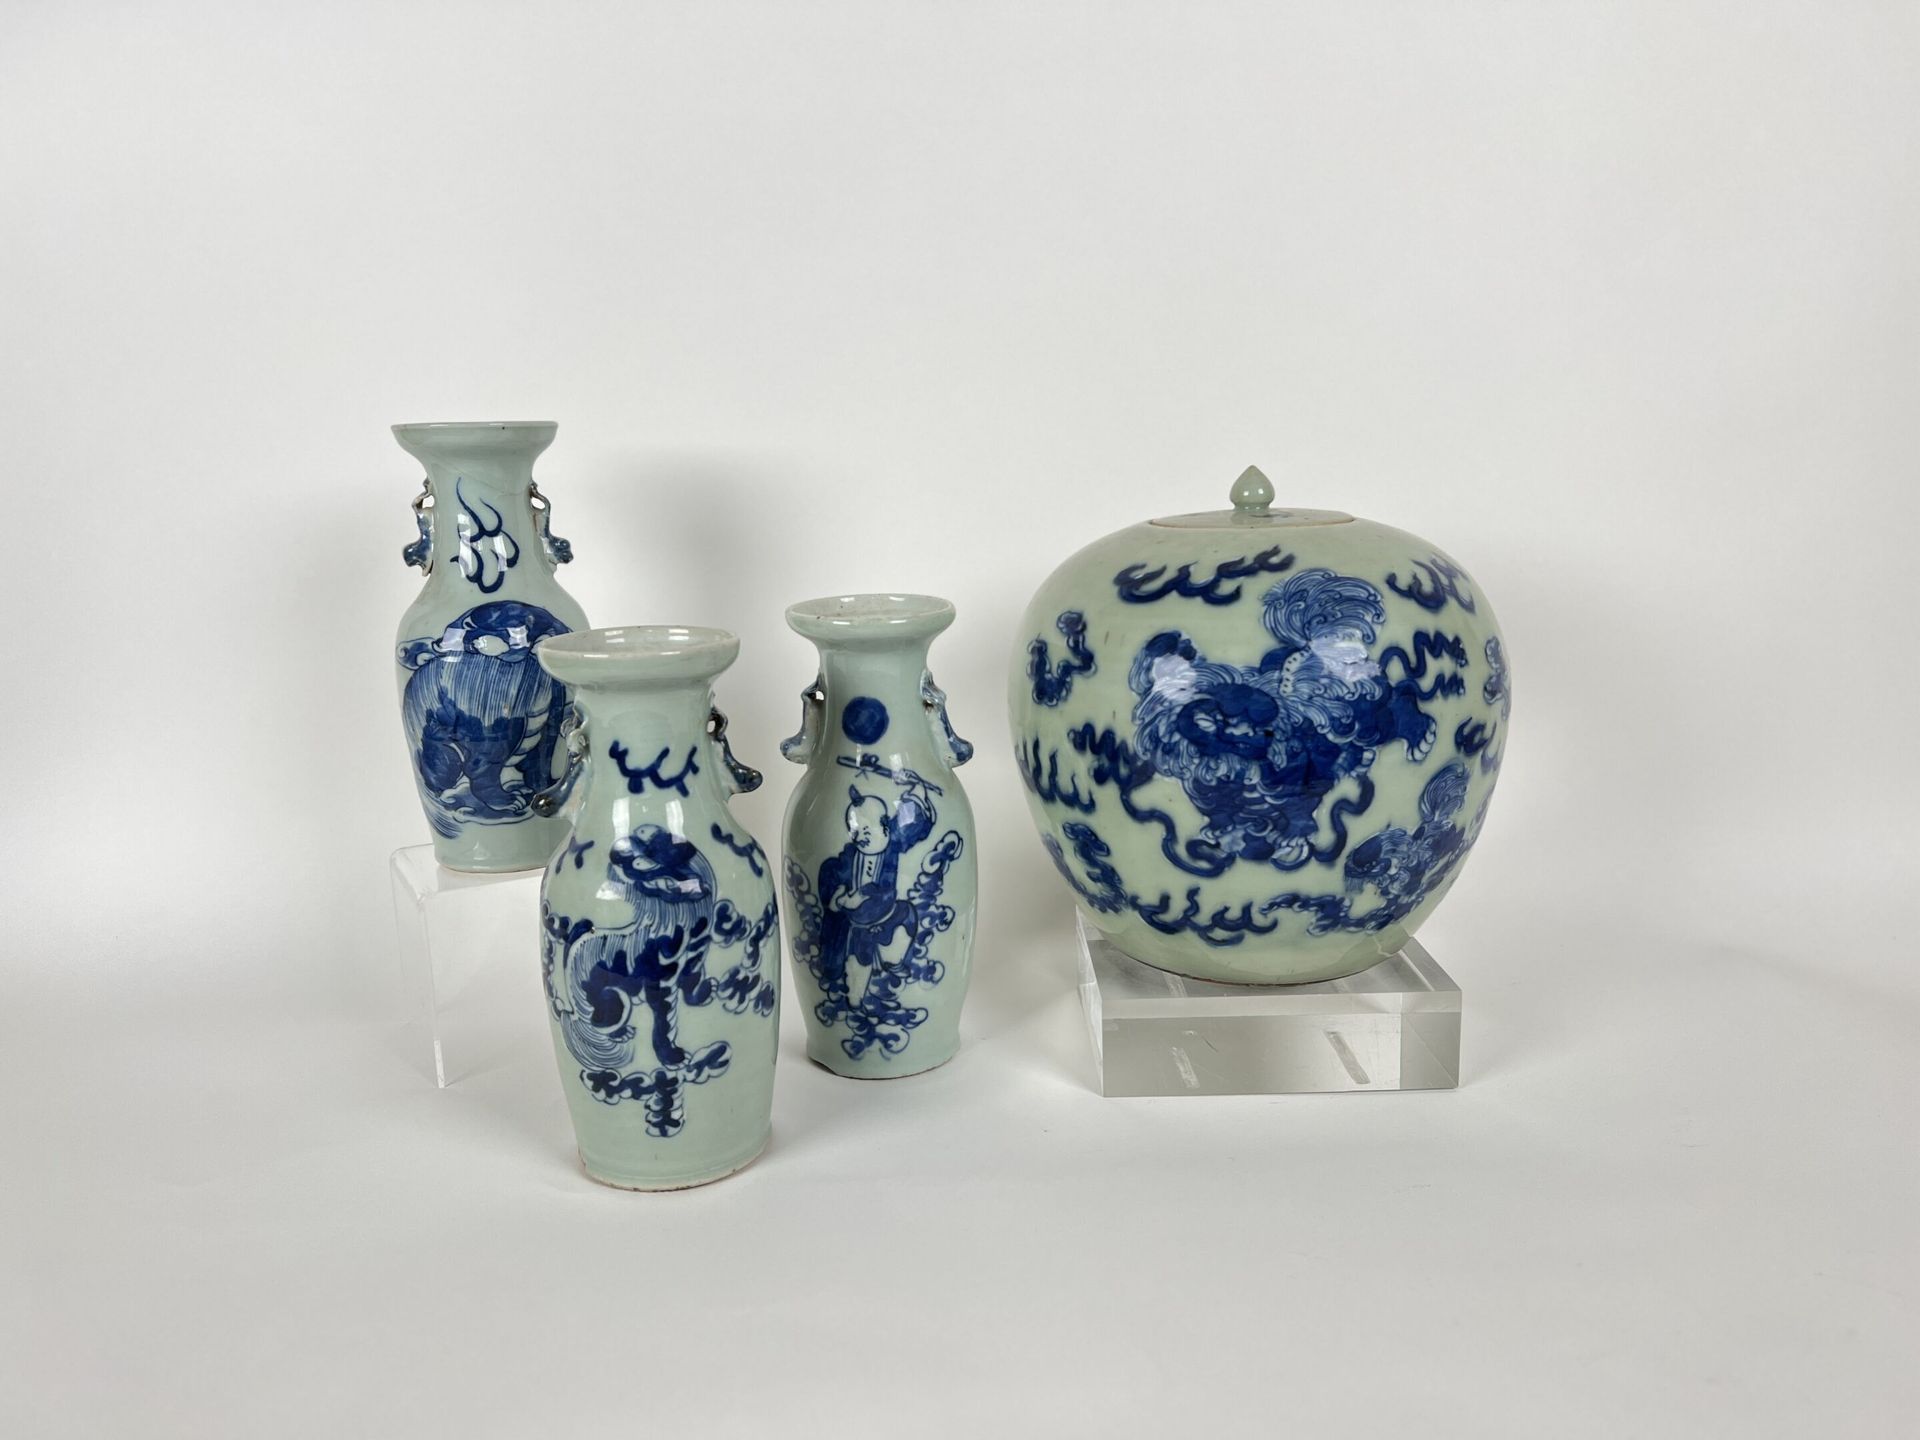 Null CHINA, NANKIN
GINGER POT and 3 MAILLET VASES in blue and white enameled por&hellip;